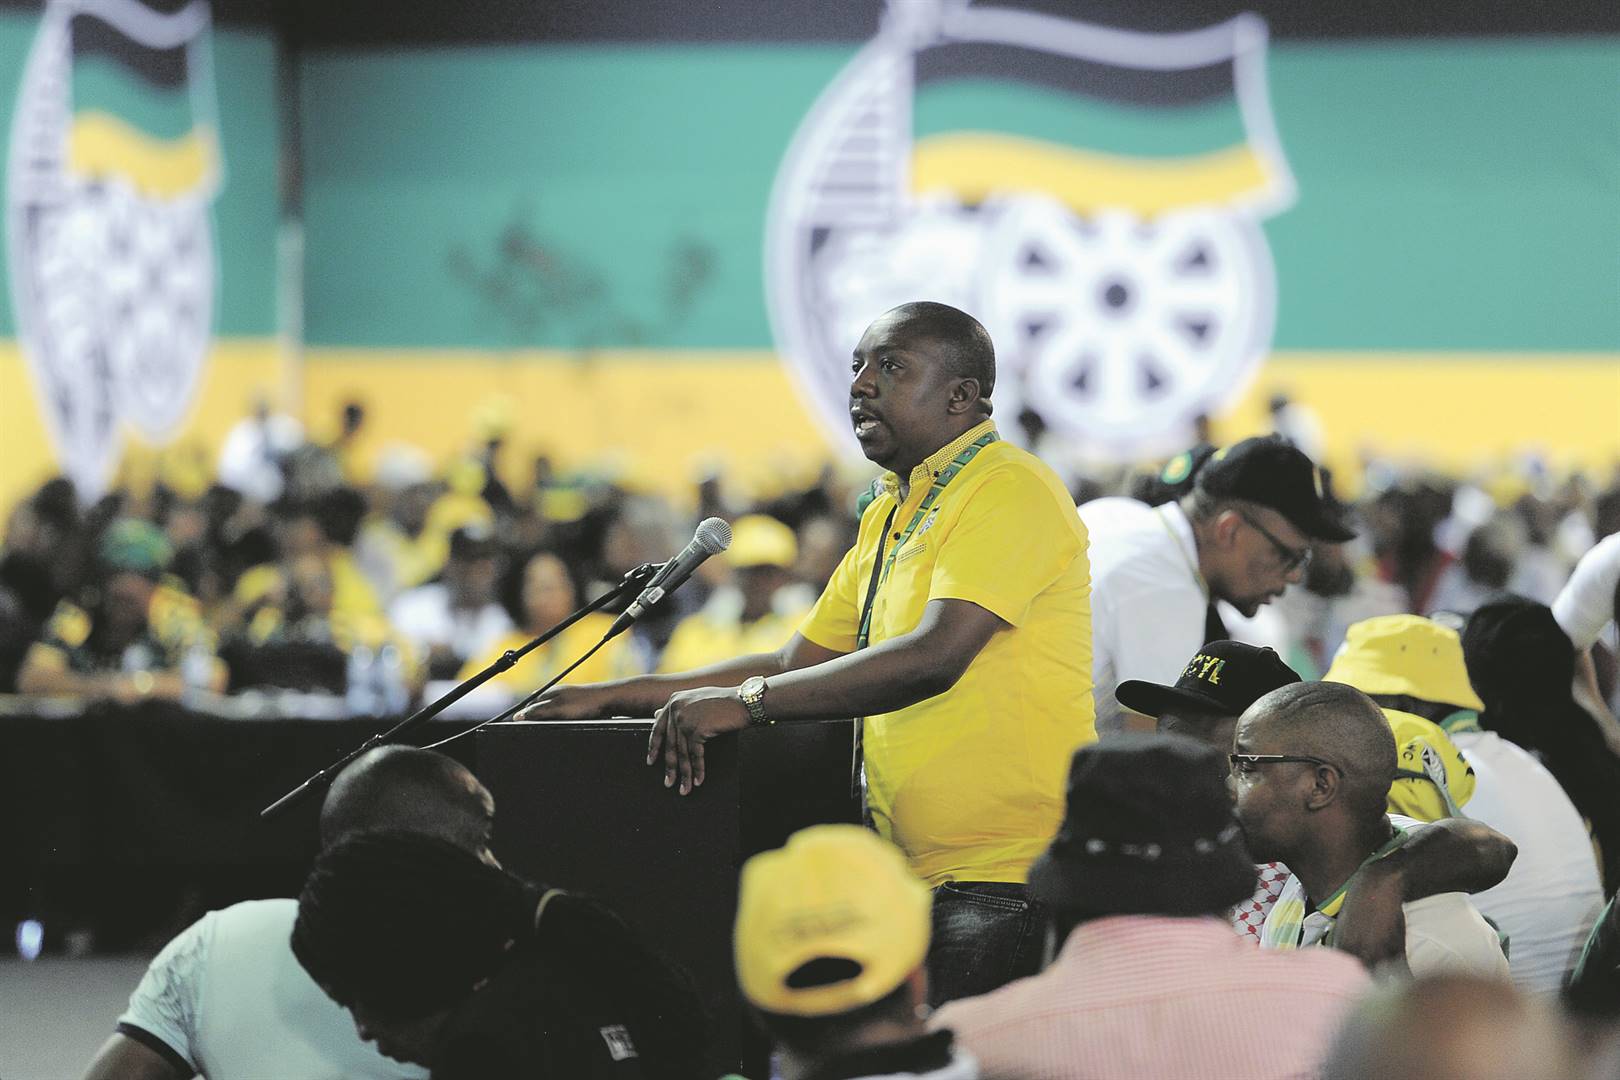 Delegates during the nomination session for  the top six candidates at the ANC national elective conference at Nasrec in 2017. Photo: Felix Dlangamandla